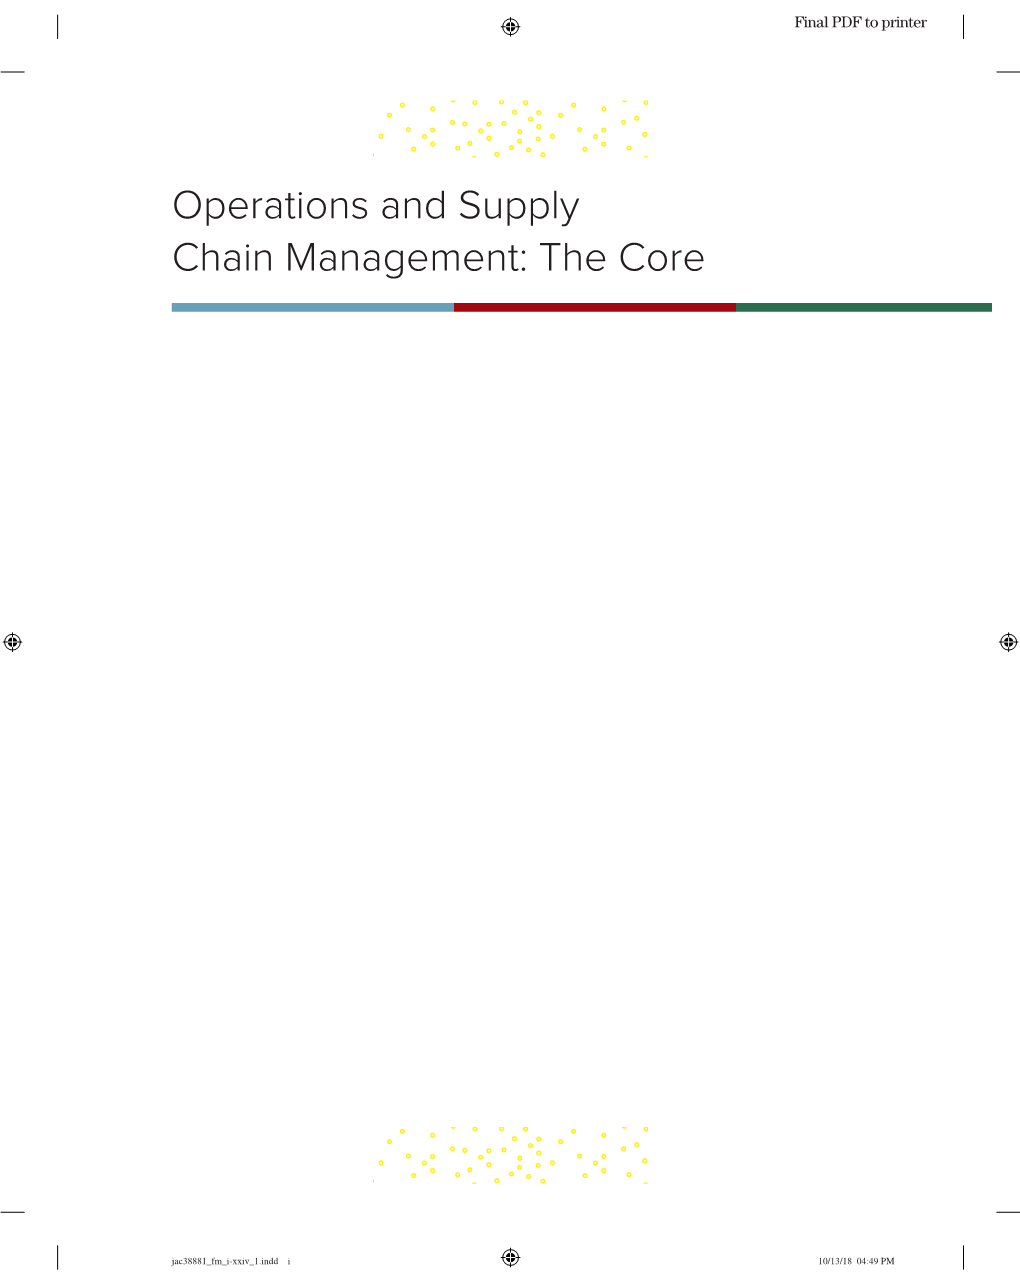 Operations and Supply Chain Management: the Core